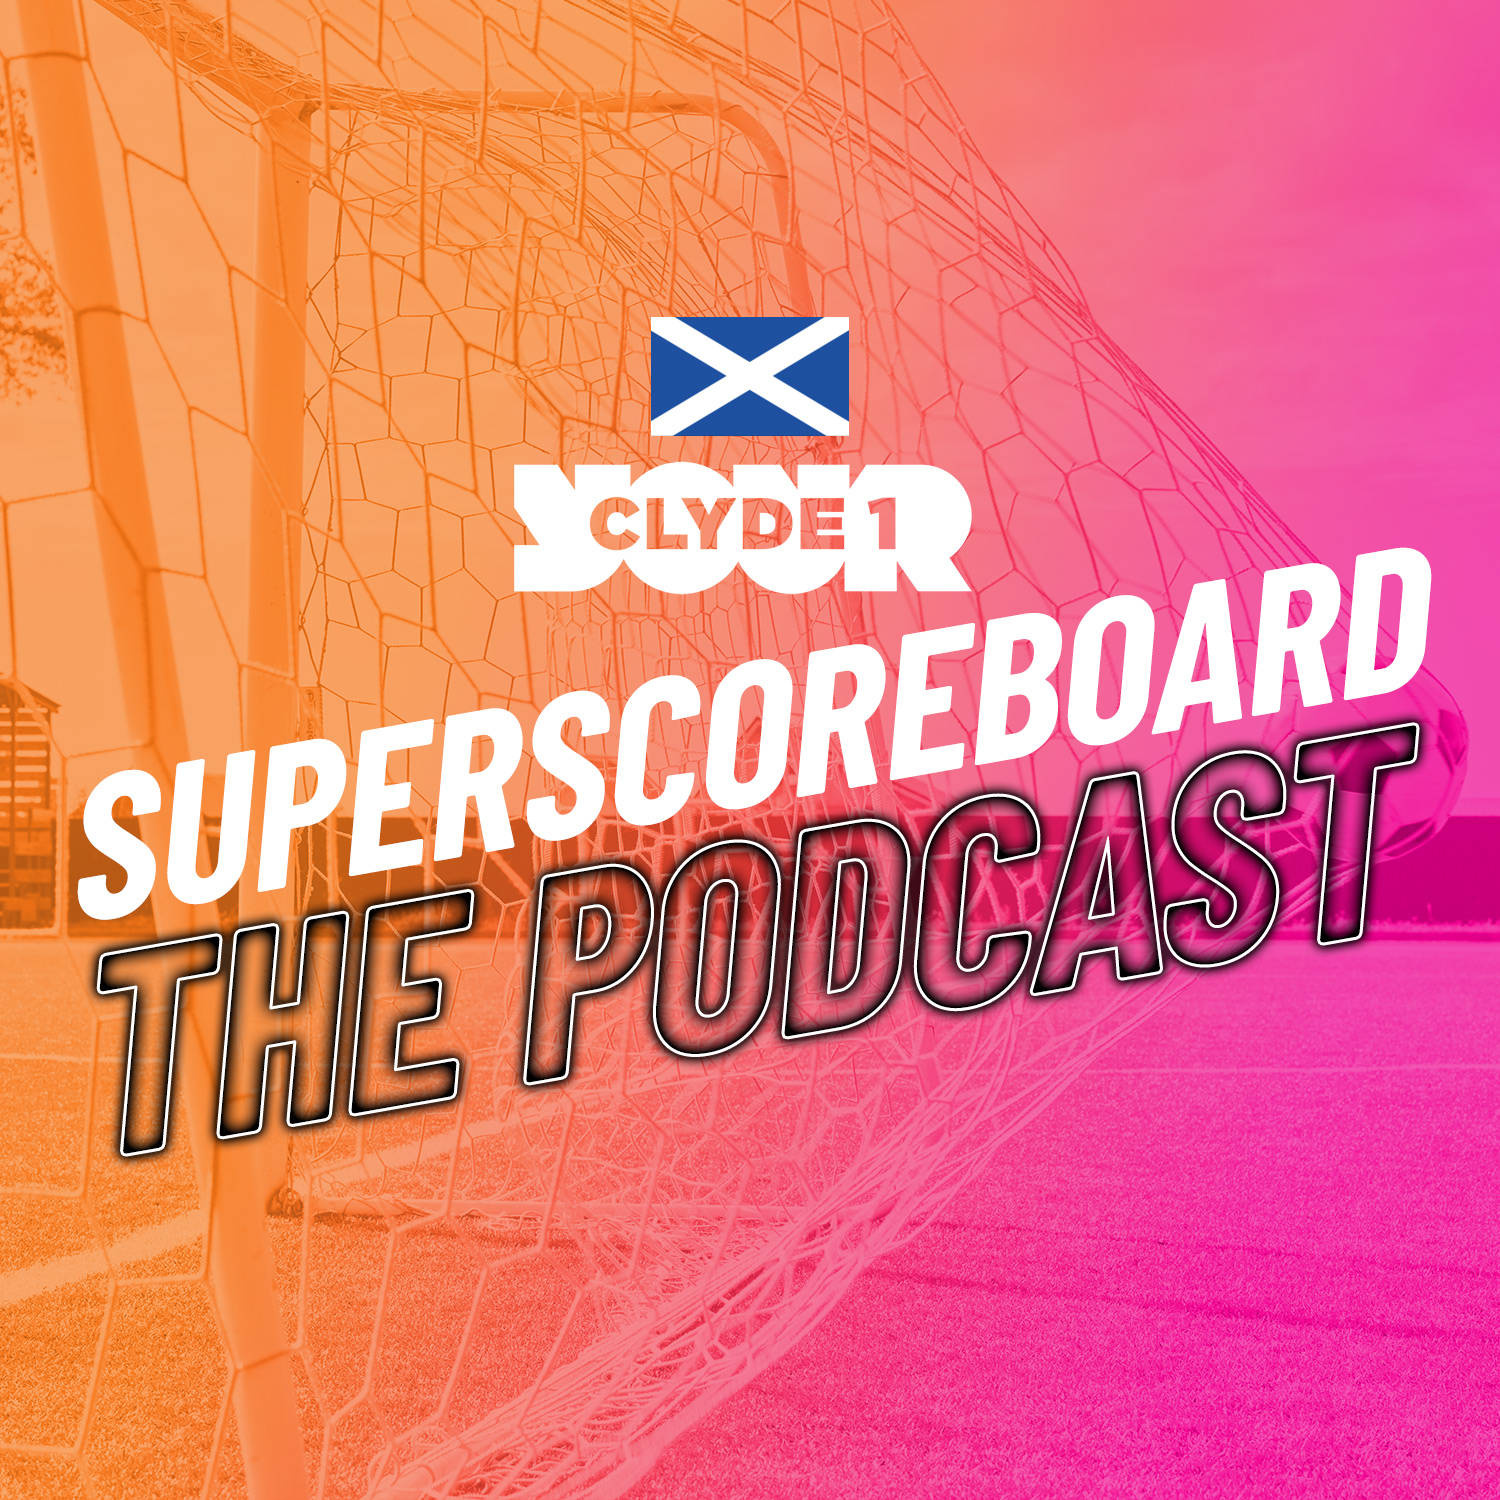 Sunday 10th March Clyde 1 Superscoreboard – Part 1